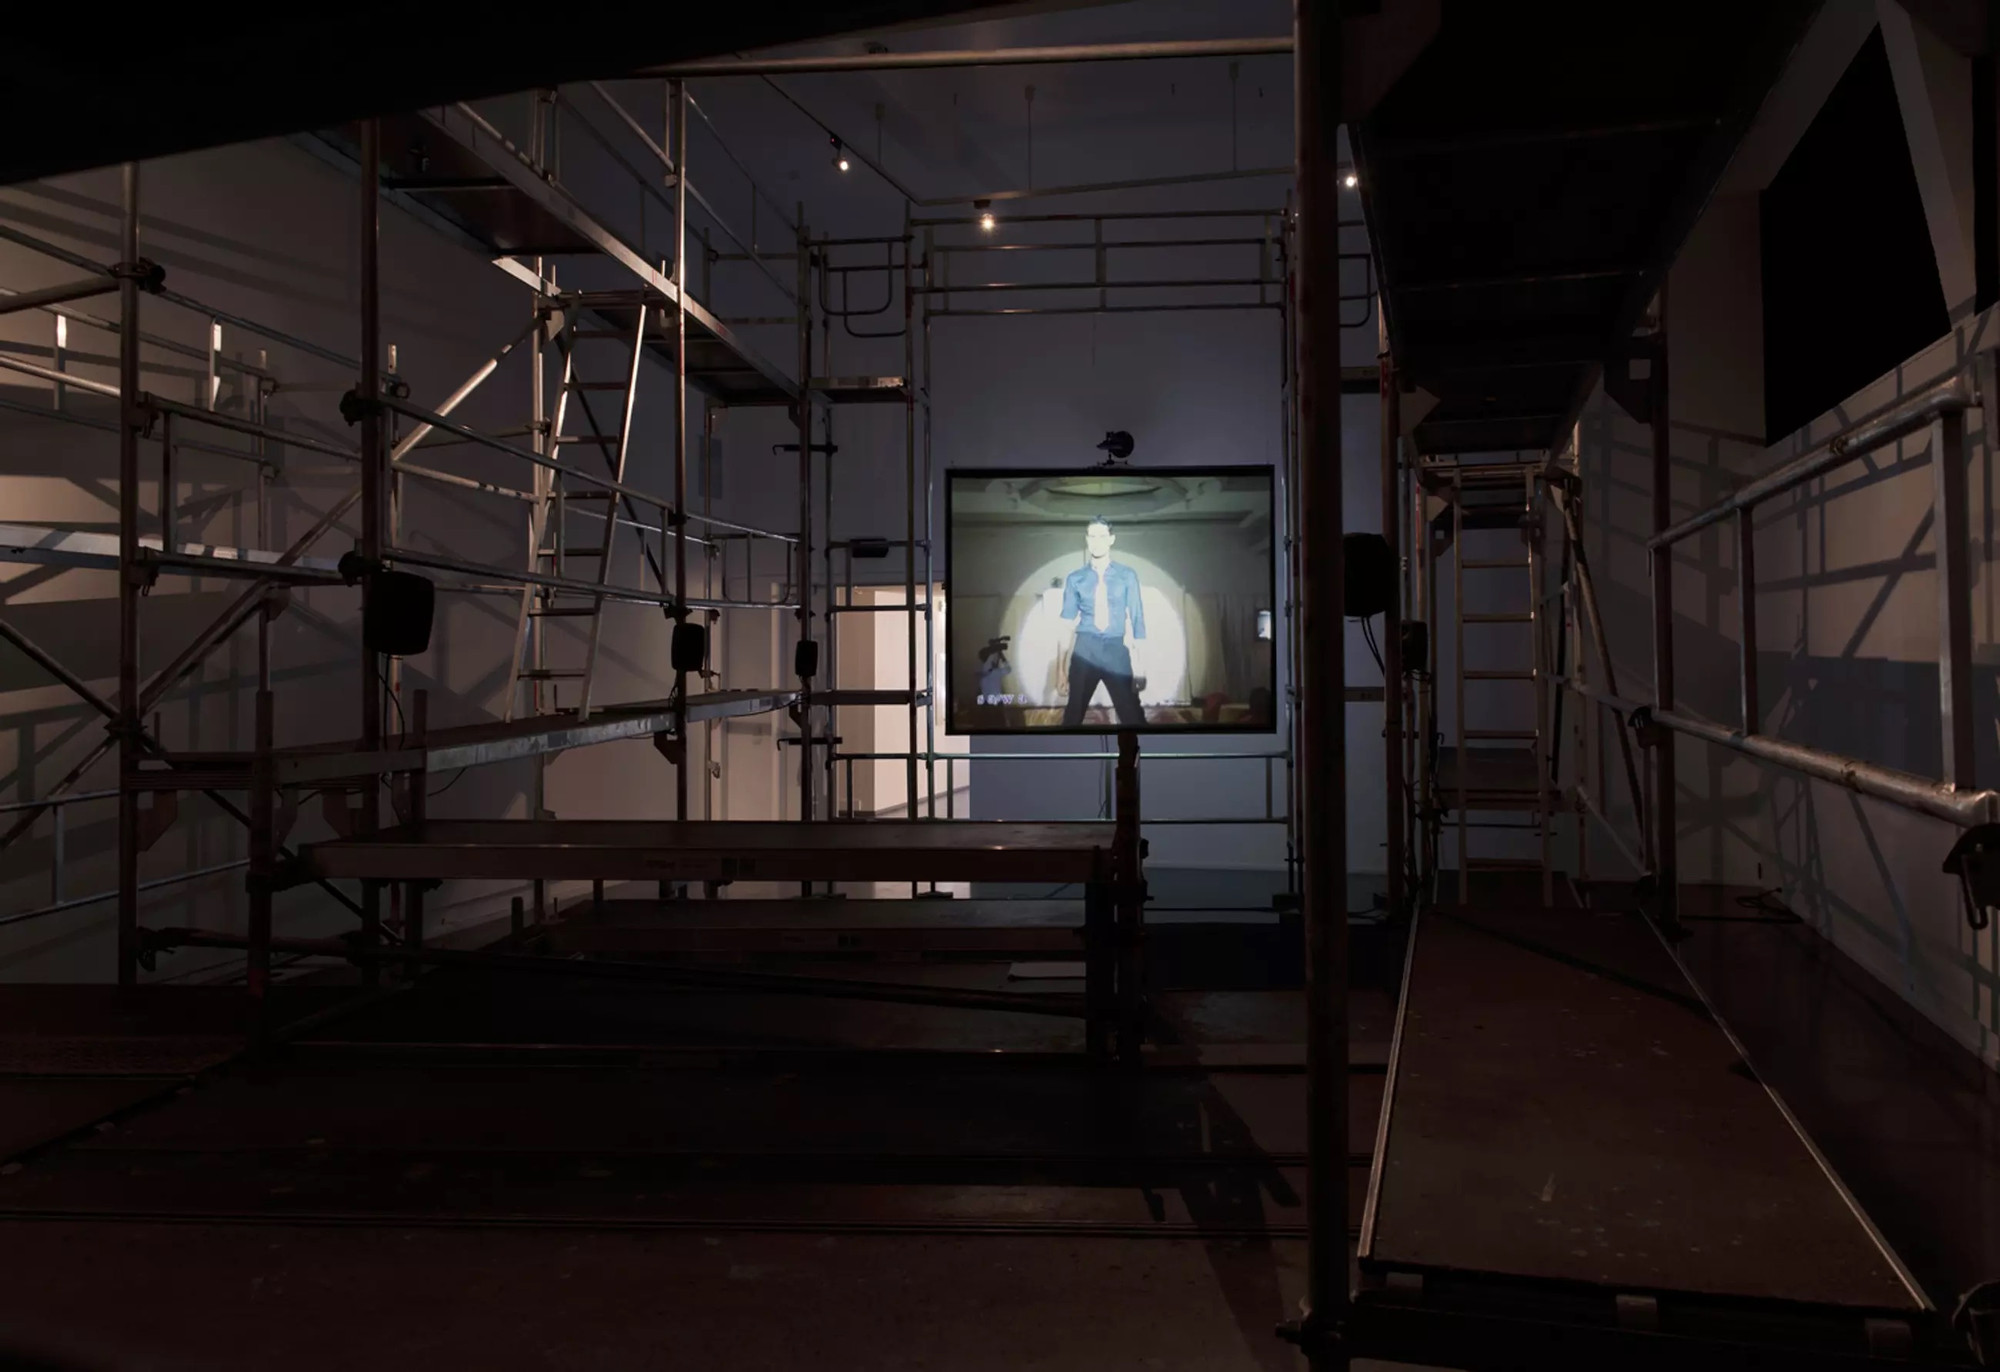 Season of Migration to the North, 2015,
Video instalation.